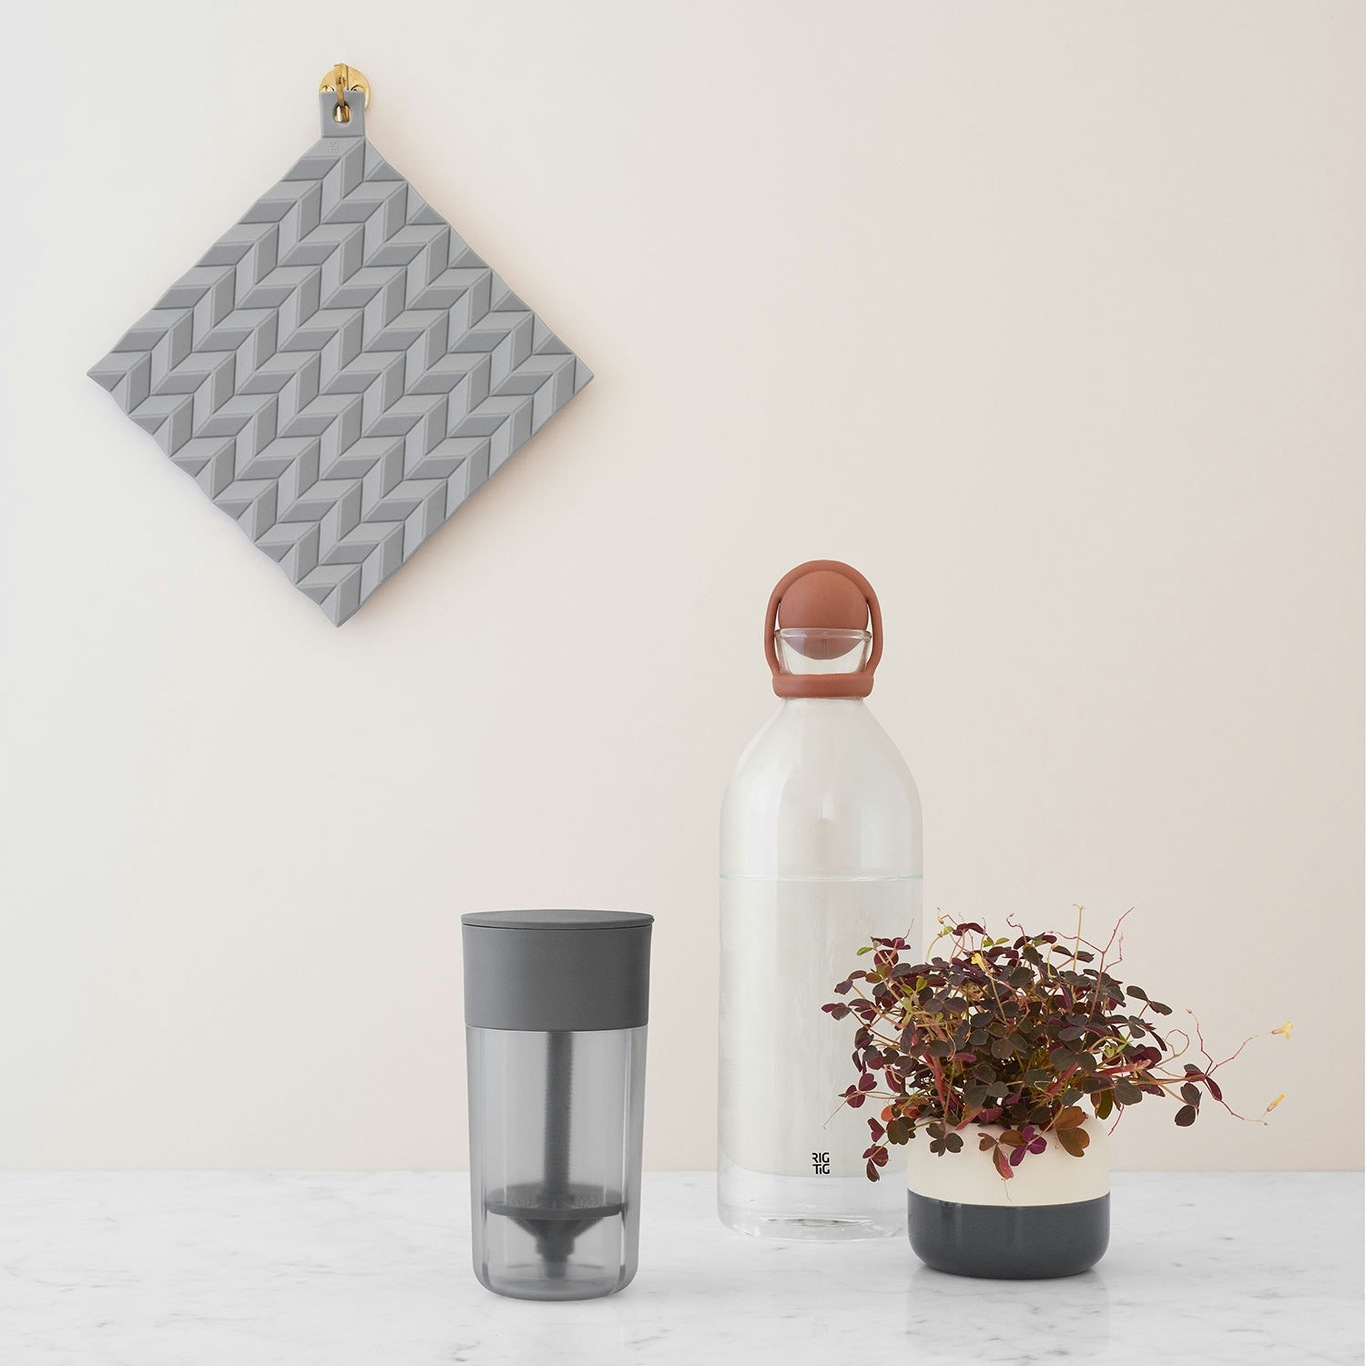 https://royaldesign.com/image/2/rig-tig-by-stelton-cheese-it-parmesan-mill-grey-1?w=800&quality=80